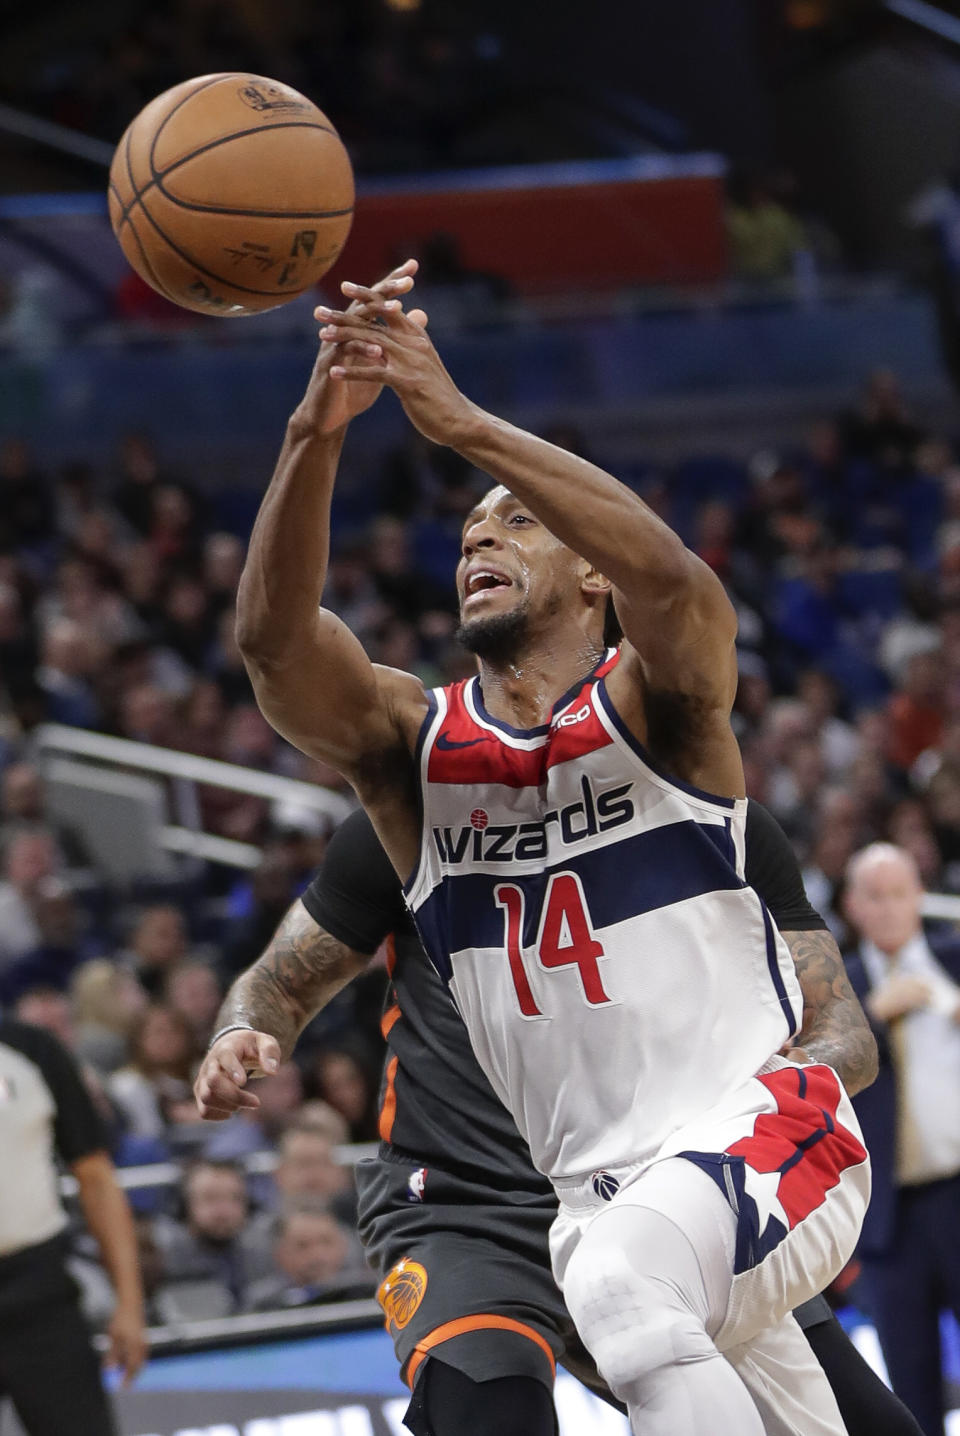 Washington Wizards guard Ish Smith (14) loses control of the ball as he drives around Orlando Magic guard D.J. Augustin, back left, during the first half of an NBA basketball game Wednesday, Jan. 8, 2020, in Orlando, Fla. (AP Photo/John Raoux)